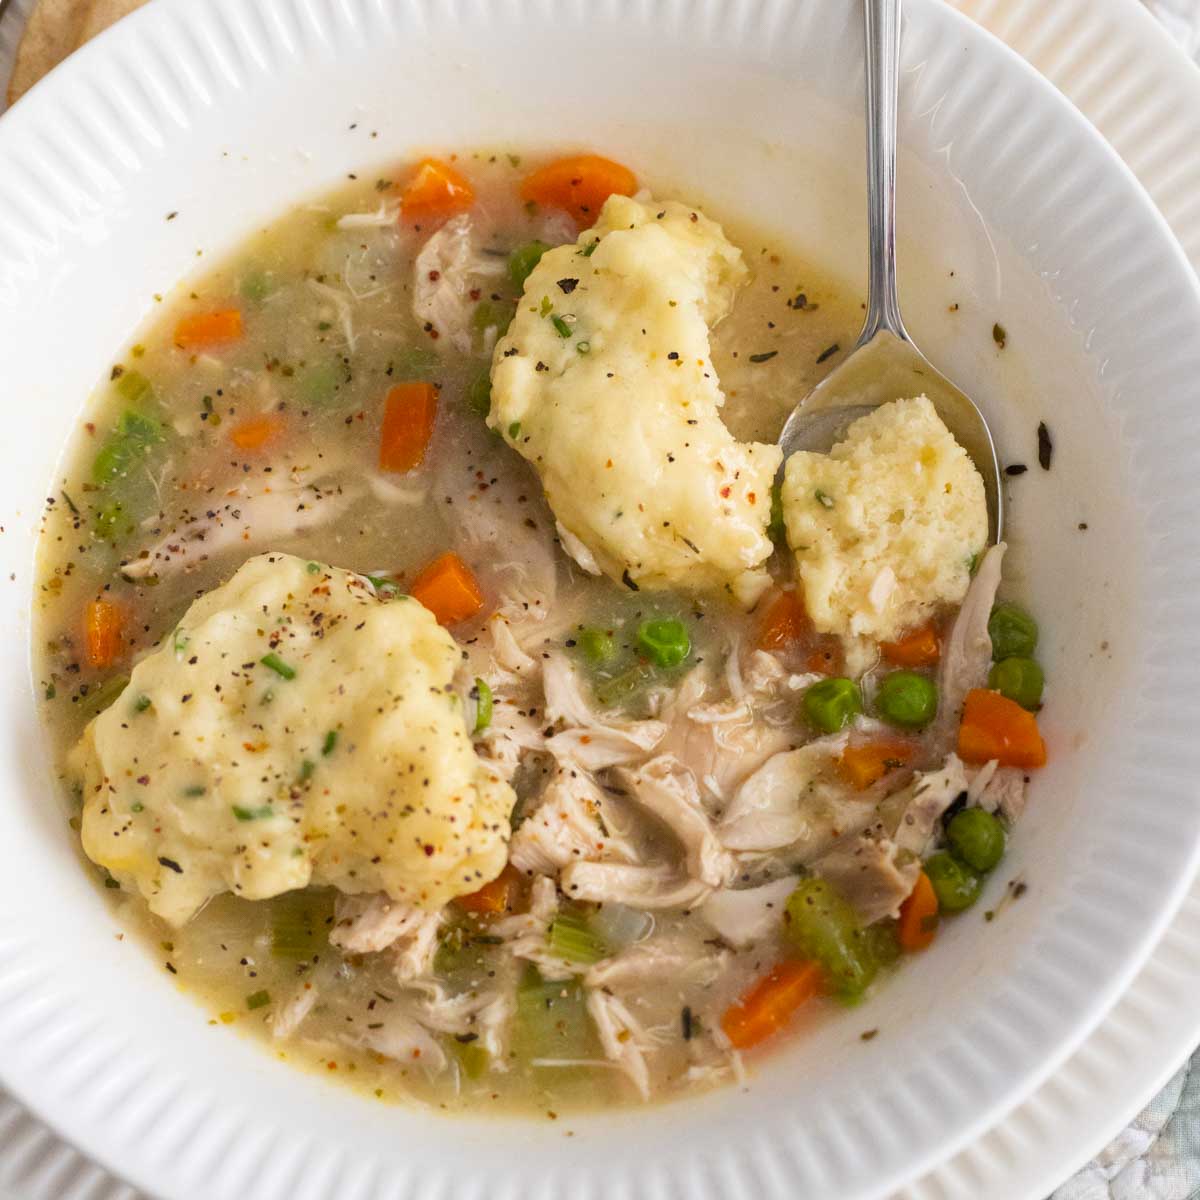 The white bowl has a serving of chicken and dumplings with a spoon taking a bite of the dumpling to show texture.